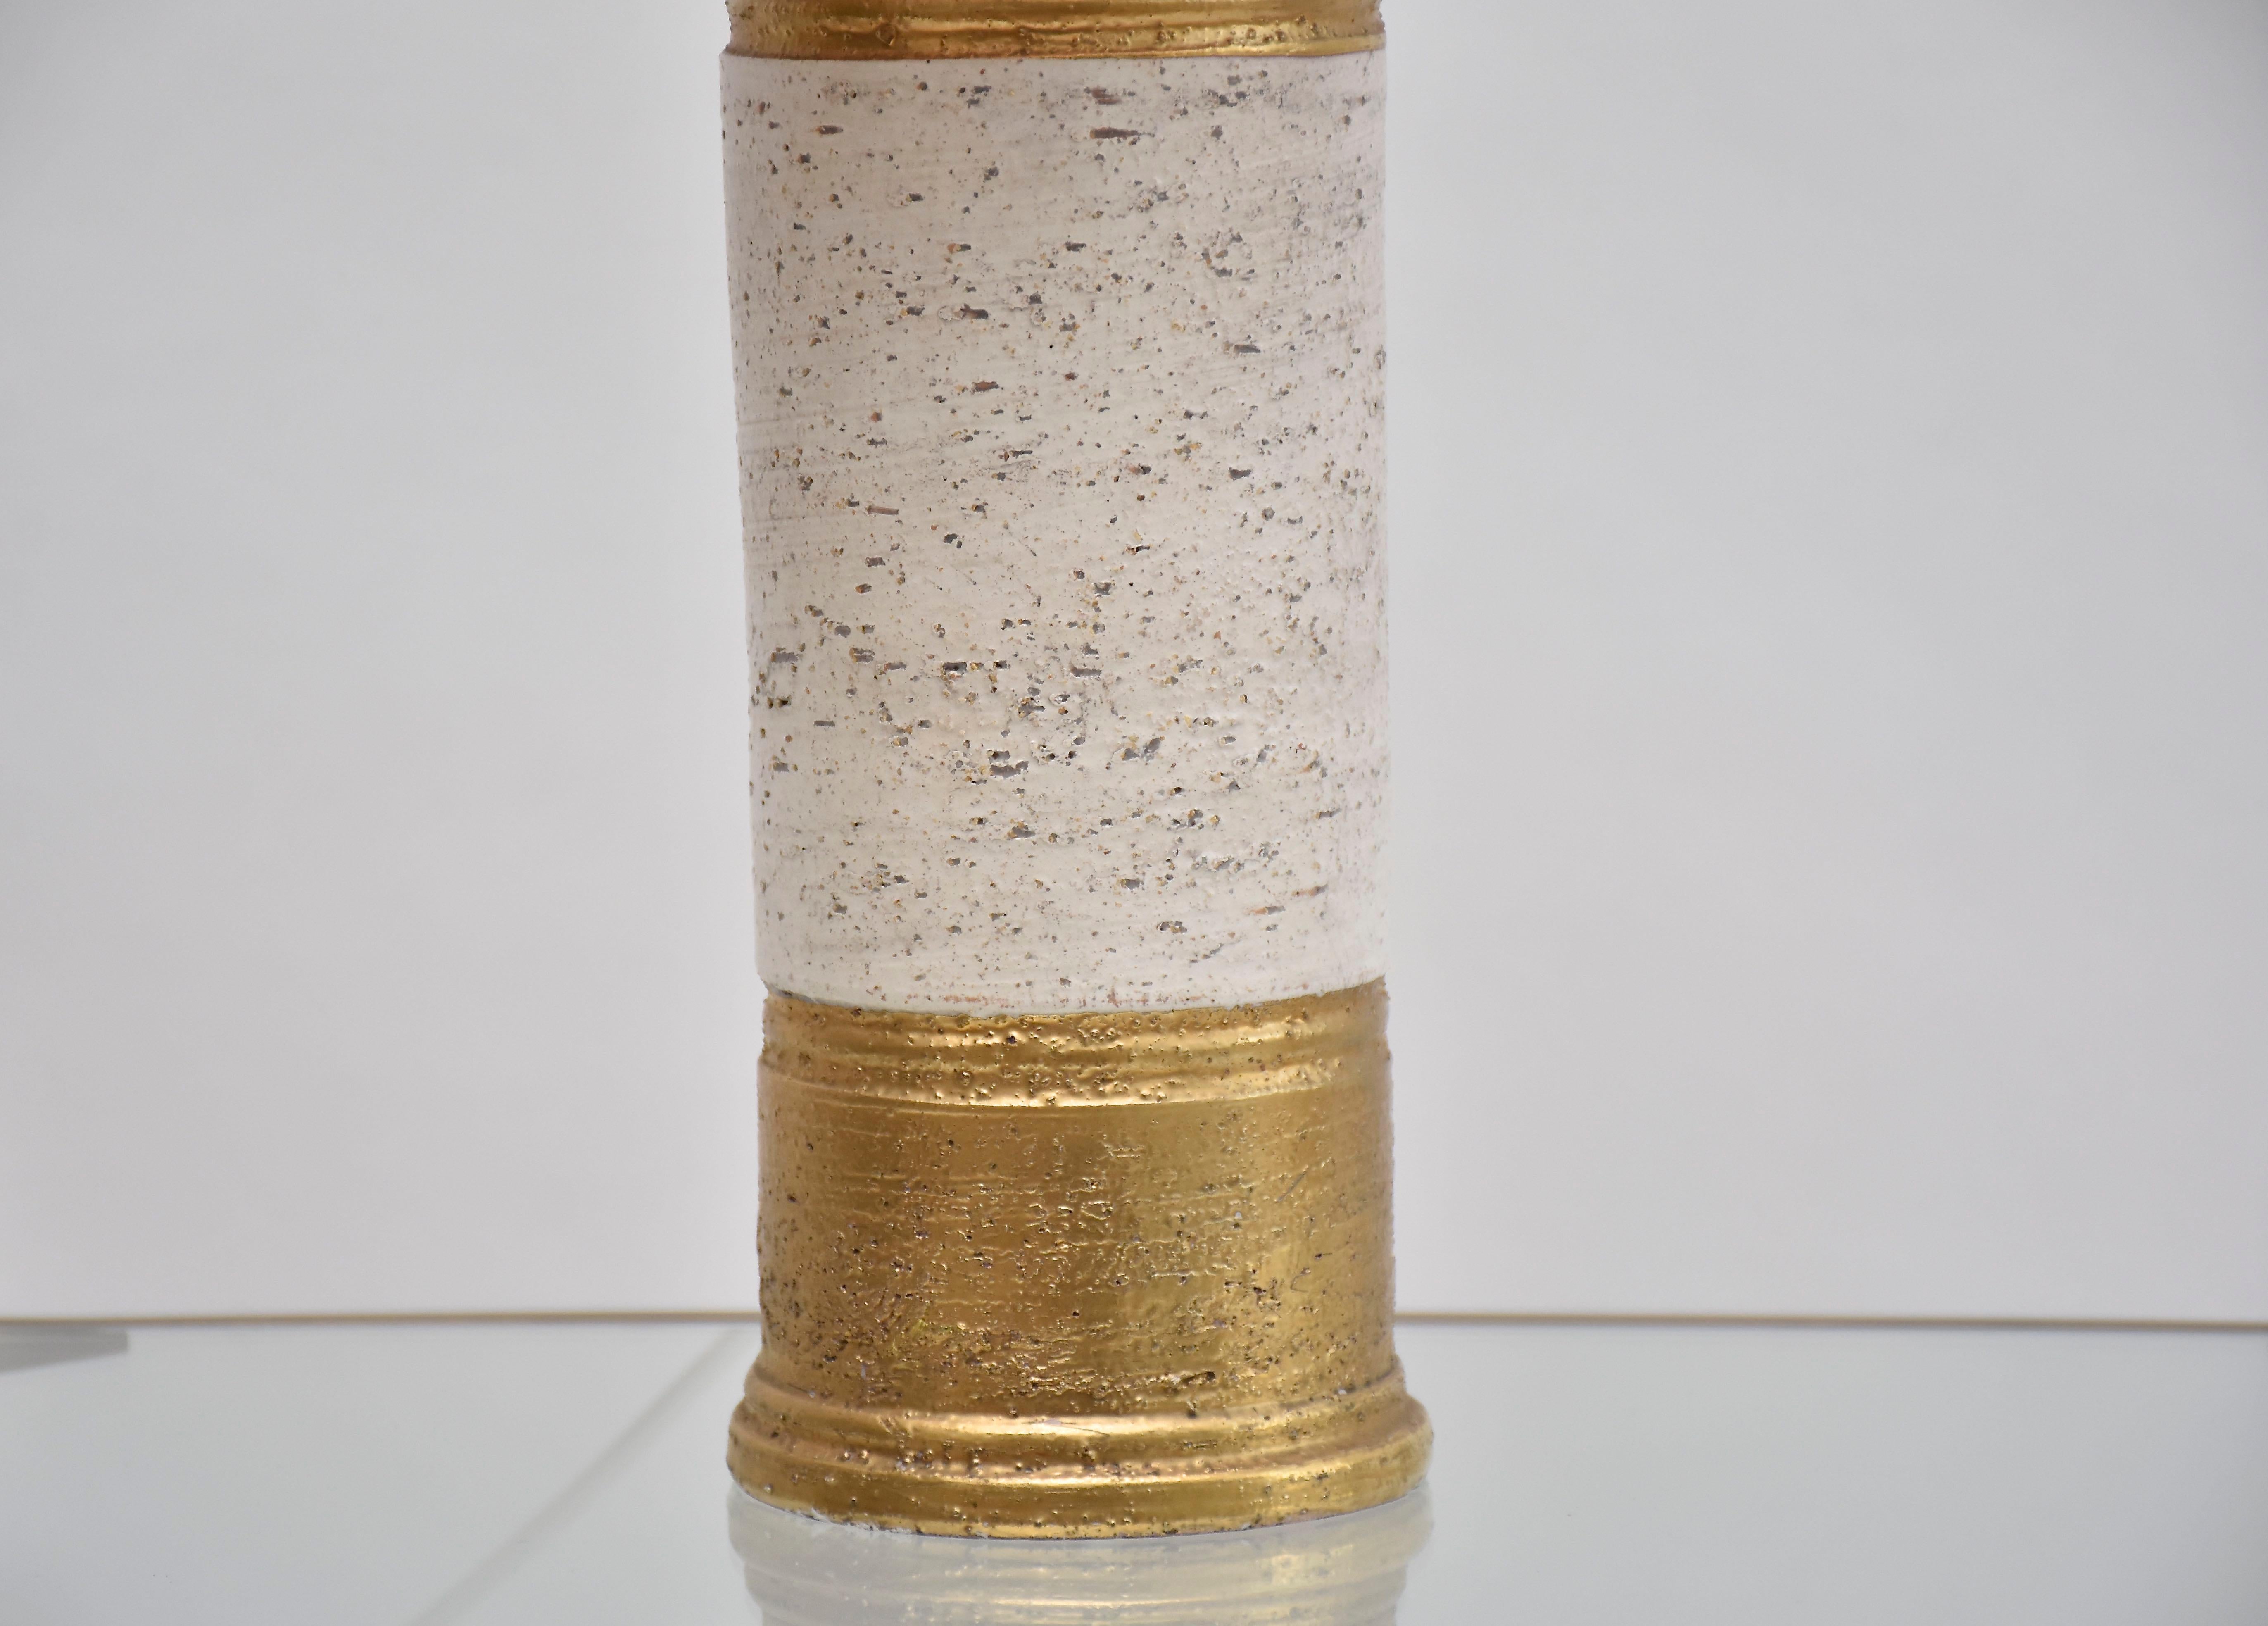 Beautiful ceramic table lamp designed by Bitossi for Bergboms- Sweden.
This pretty lamp has gold glazed base and top with in the centre off-white glazed 'birch' texture.
Period- ca. 1960
Place of origin- Italy/ Sweden
Labeled at the bottom

Height